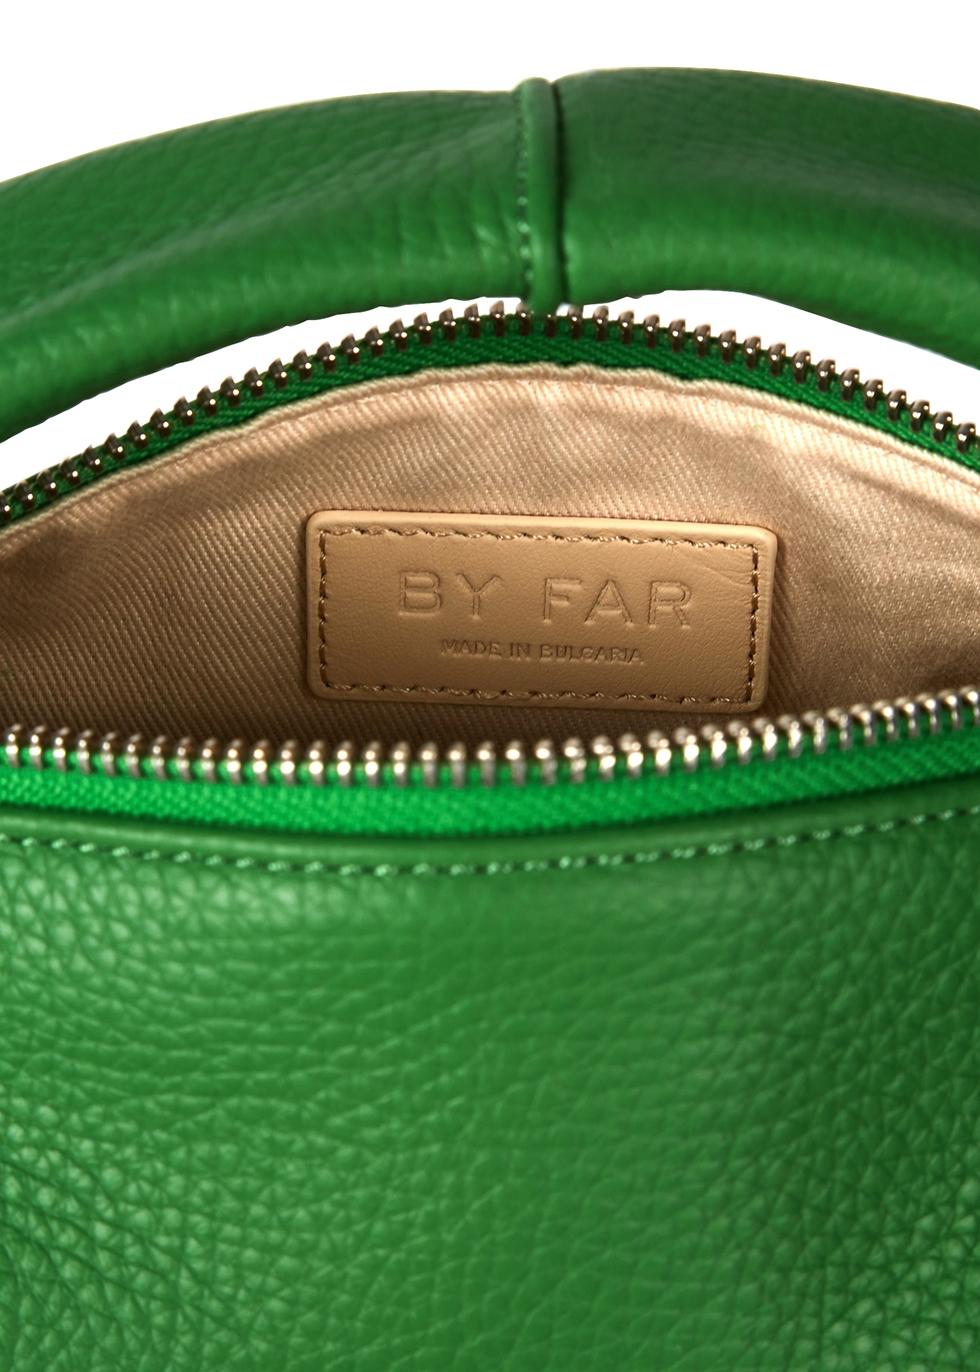 BY FAR Baby Cush Green Leather Top Handle Bag | Lyst